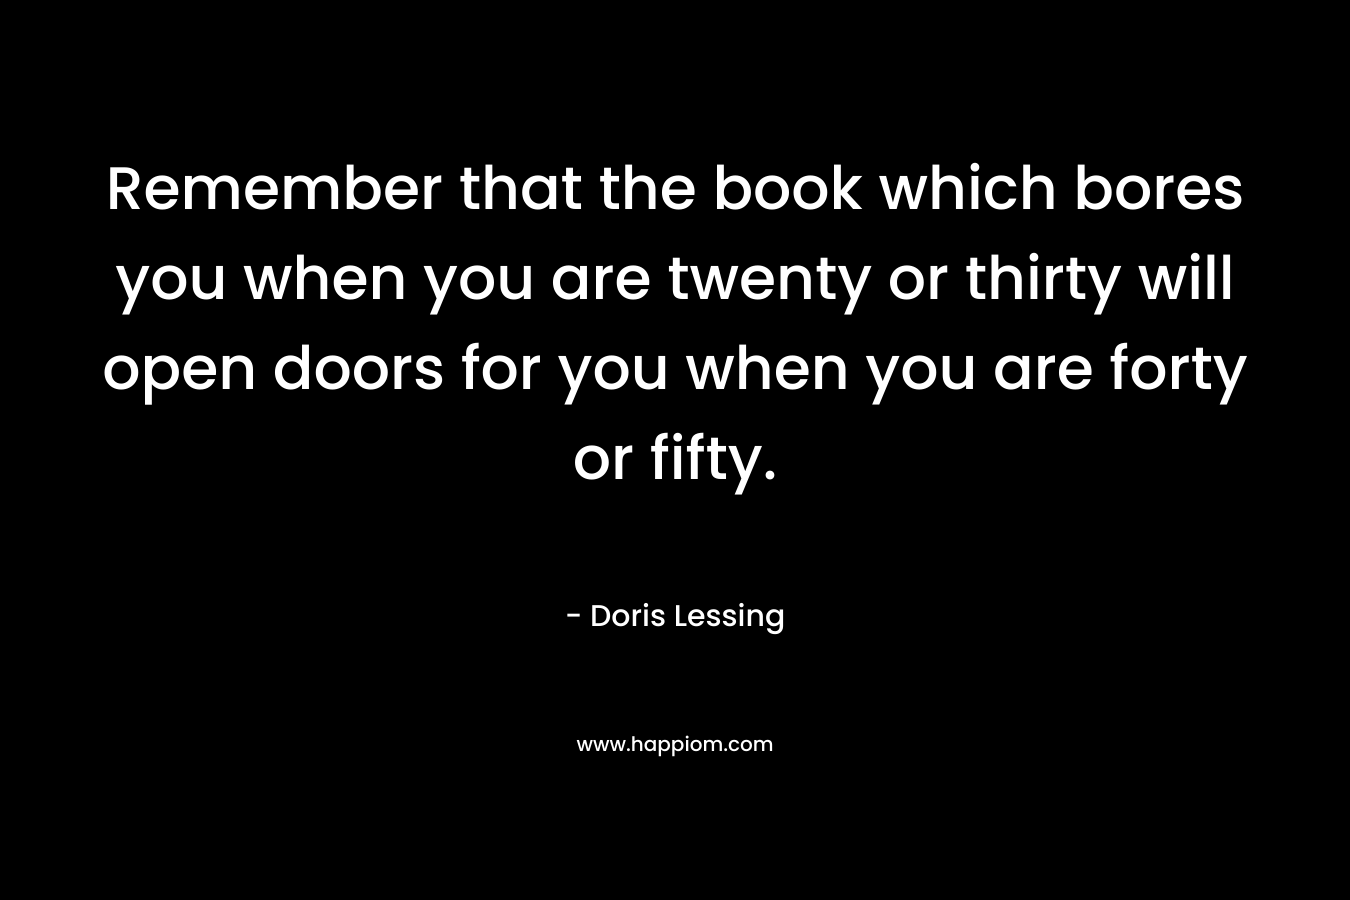 Remember that the book which bores you when you are twenty or thirty will open doors for you when you are forty or fifty. – Doris Lessing